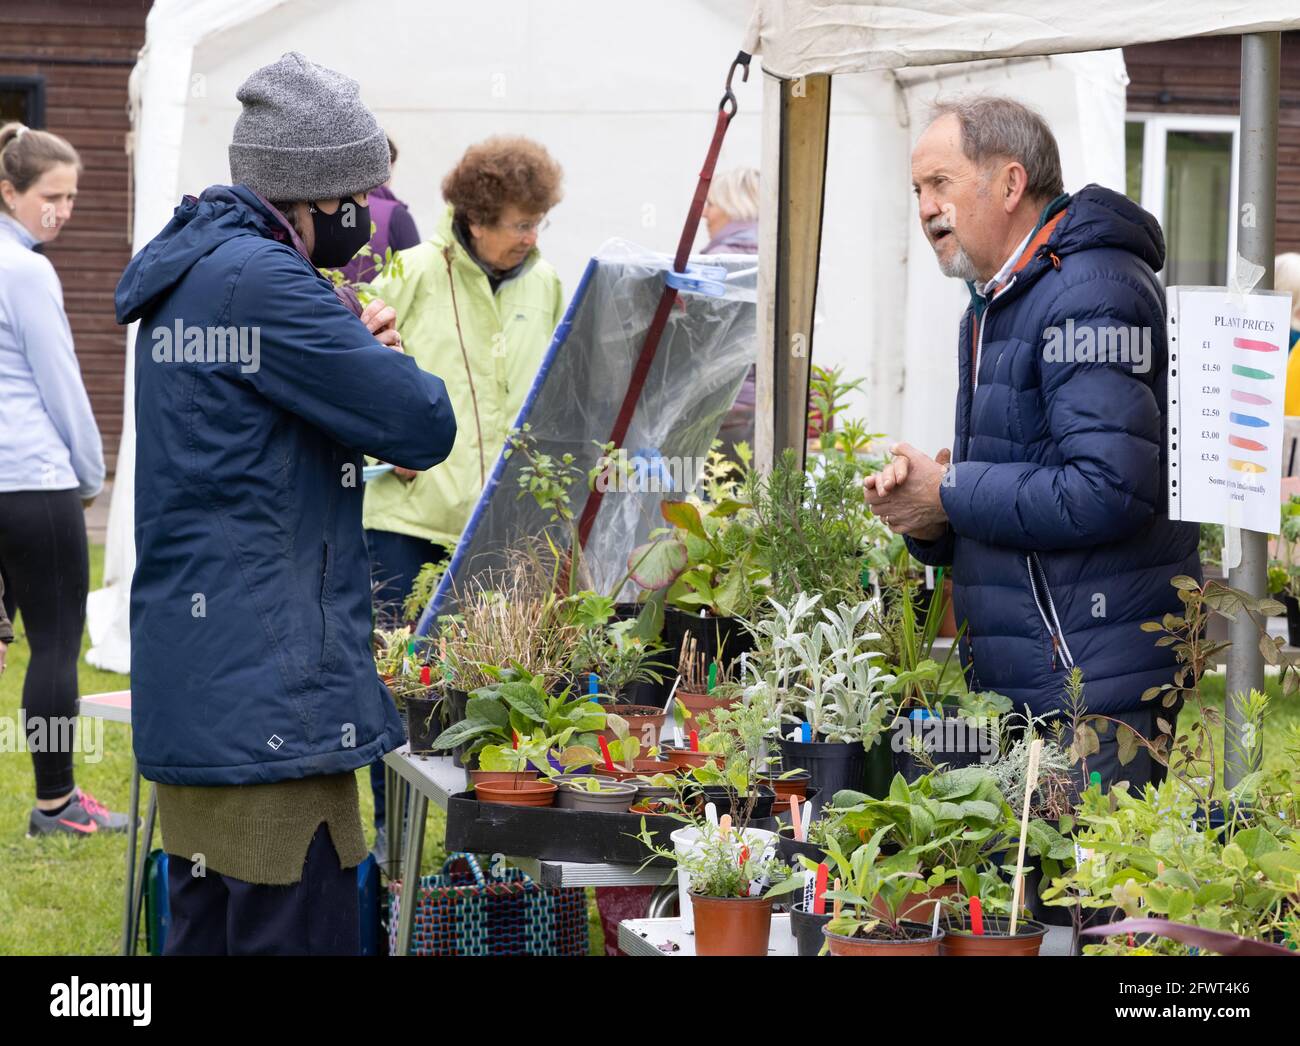 Local plant sale UK; people buying and selling plants at a stall in the village during the COVID 19 pandemic, Stetchworth, Cambridgeshire UK Stock Photo